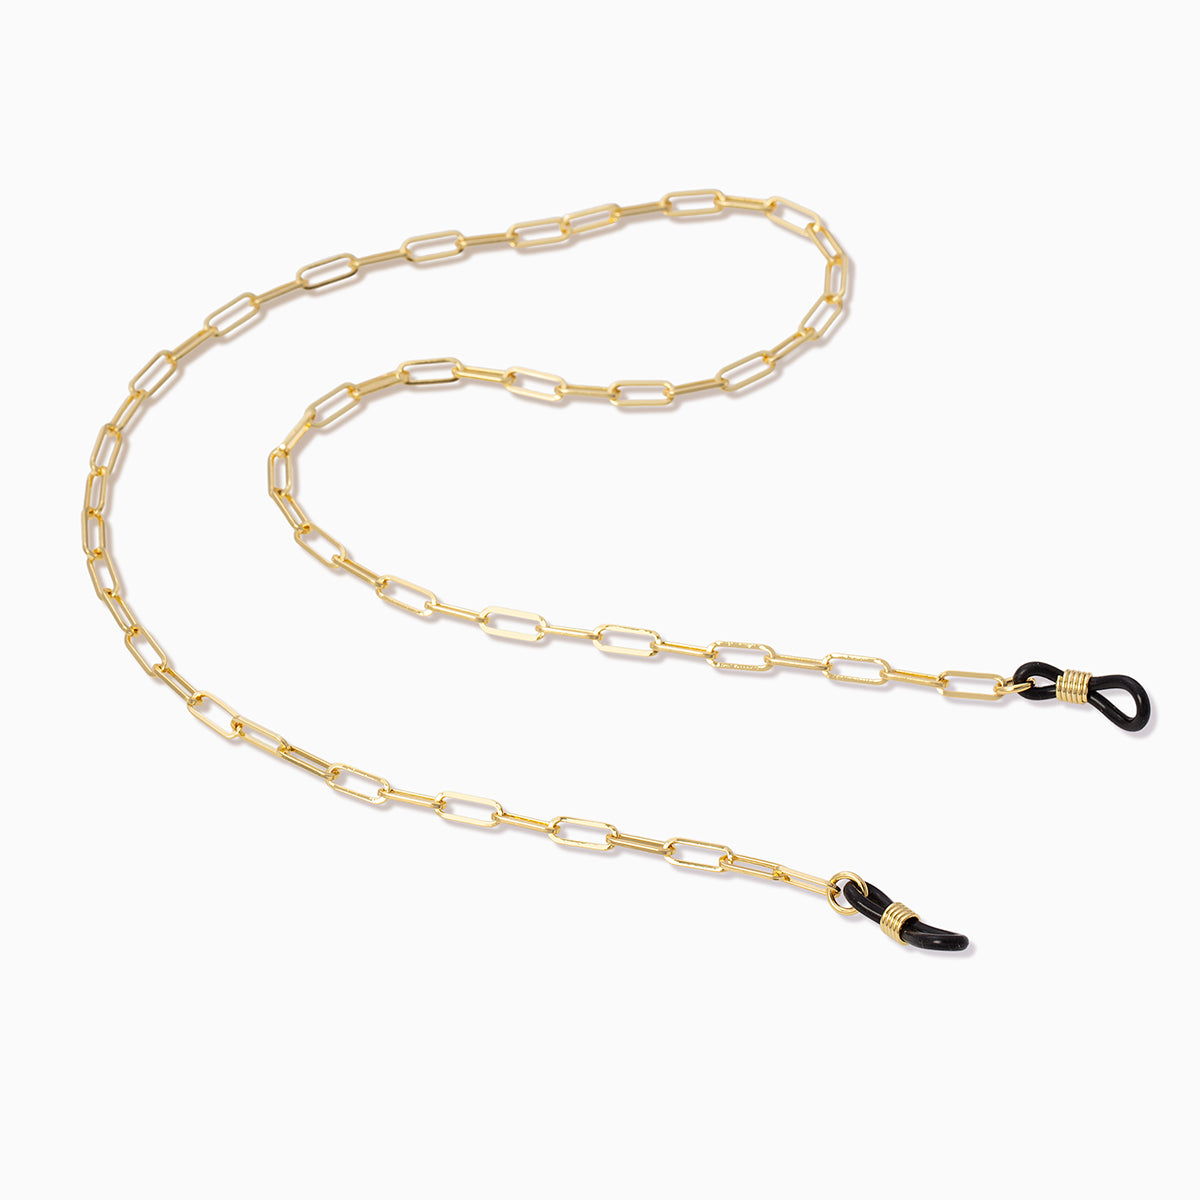 Sunglasses Chain | Gold | Product Image | Uncommon James Home